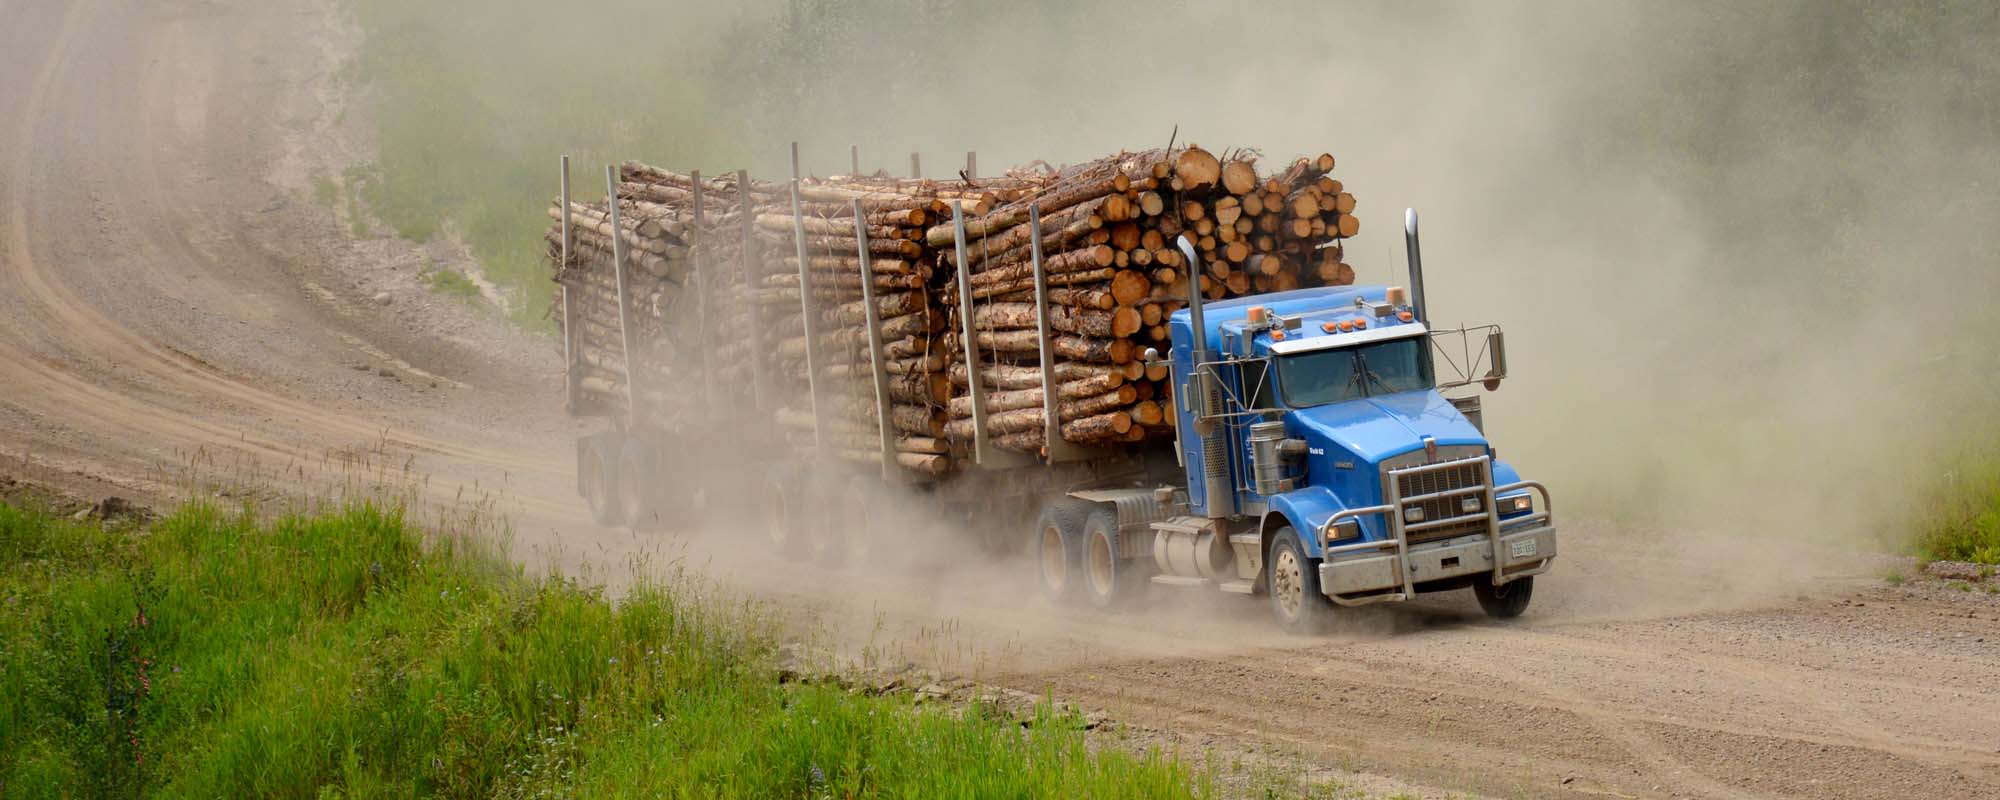 Blue truck hauling lumber along a forest road